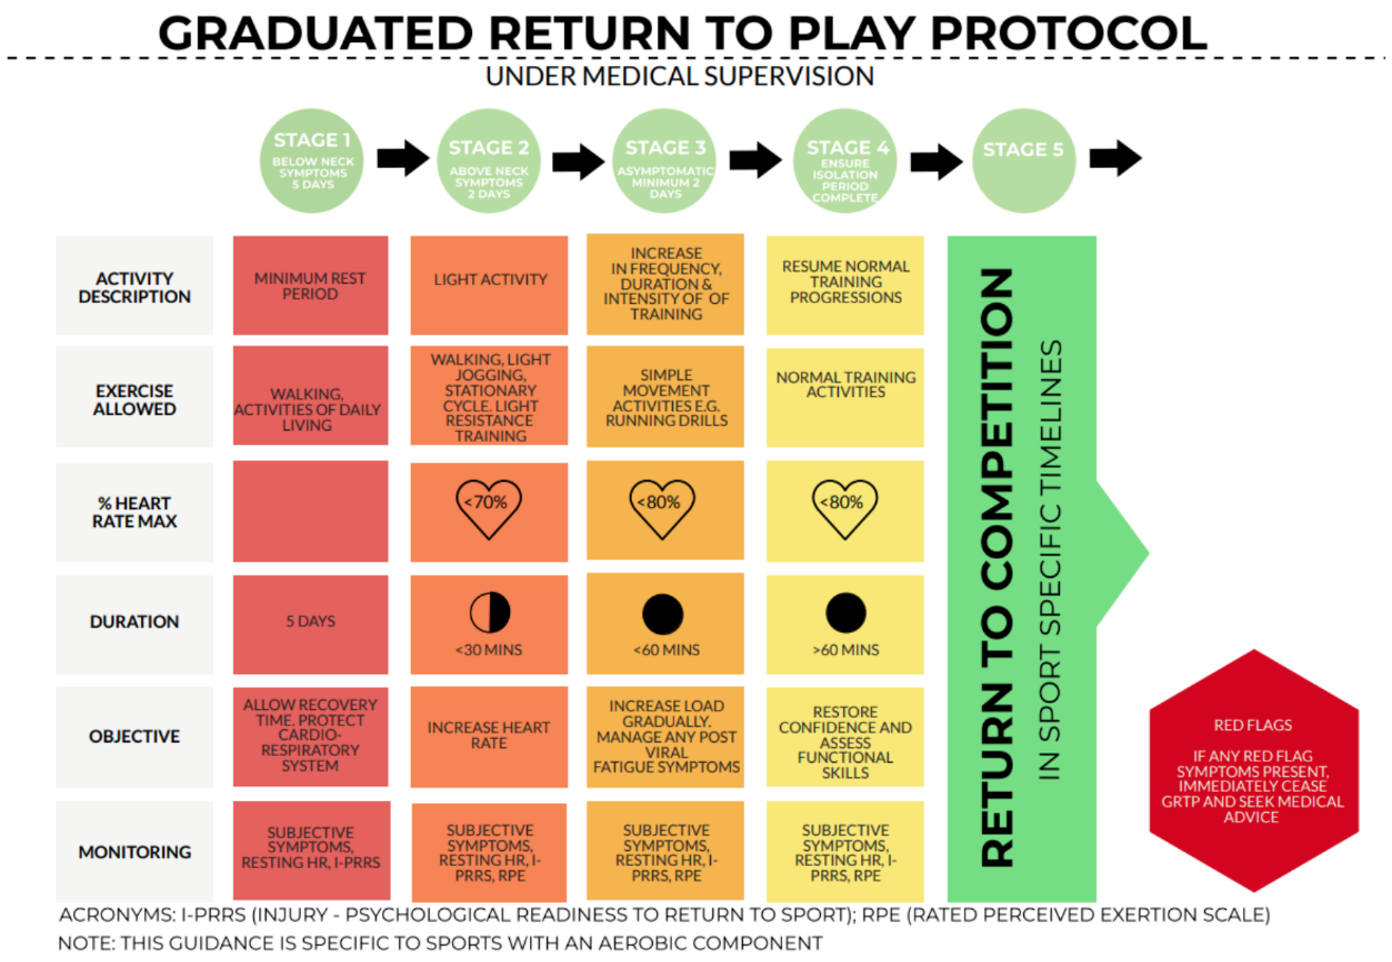 Graduated Return to Play after SARS-CoV-2 infection – what have we learned and why we've updated the guidance - BJSM blog - social media's leading SEM voice